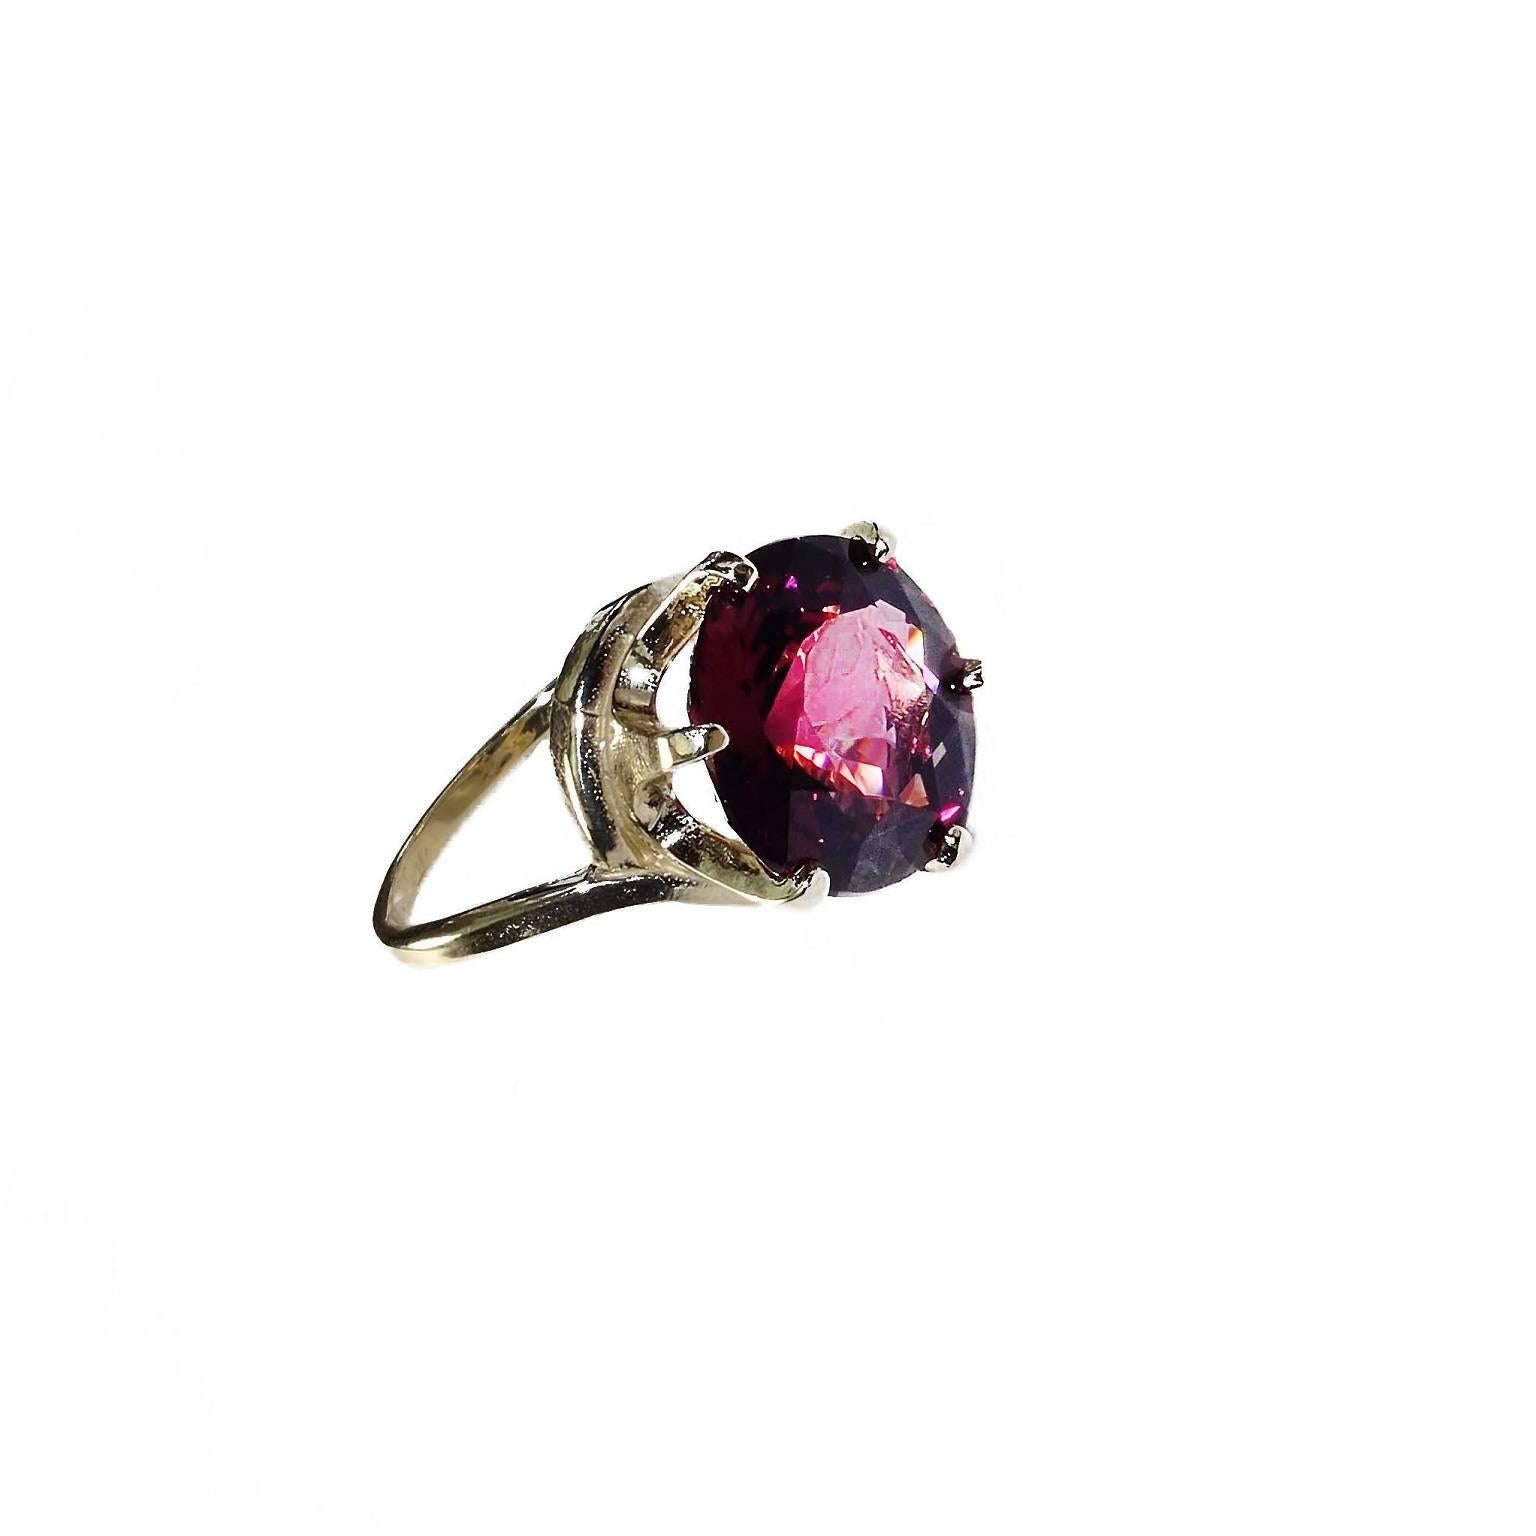 Custom made stunning, sparkling large round brilliant cut Rhodolite Garnet set in six prong  14K yellow gold mounting.  This lively Rhodolite Garnet has beautiful flashes of pink and is an amazingly large size to keep it brightness and life. It